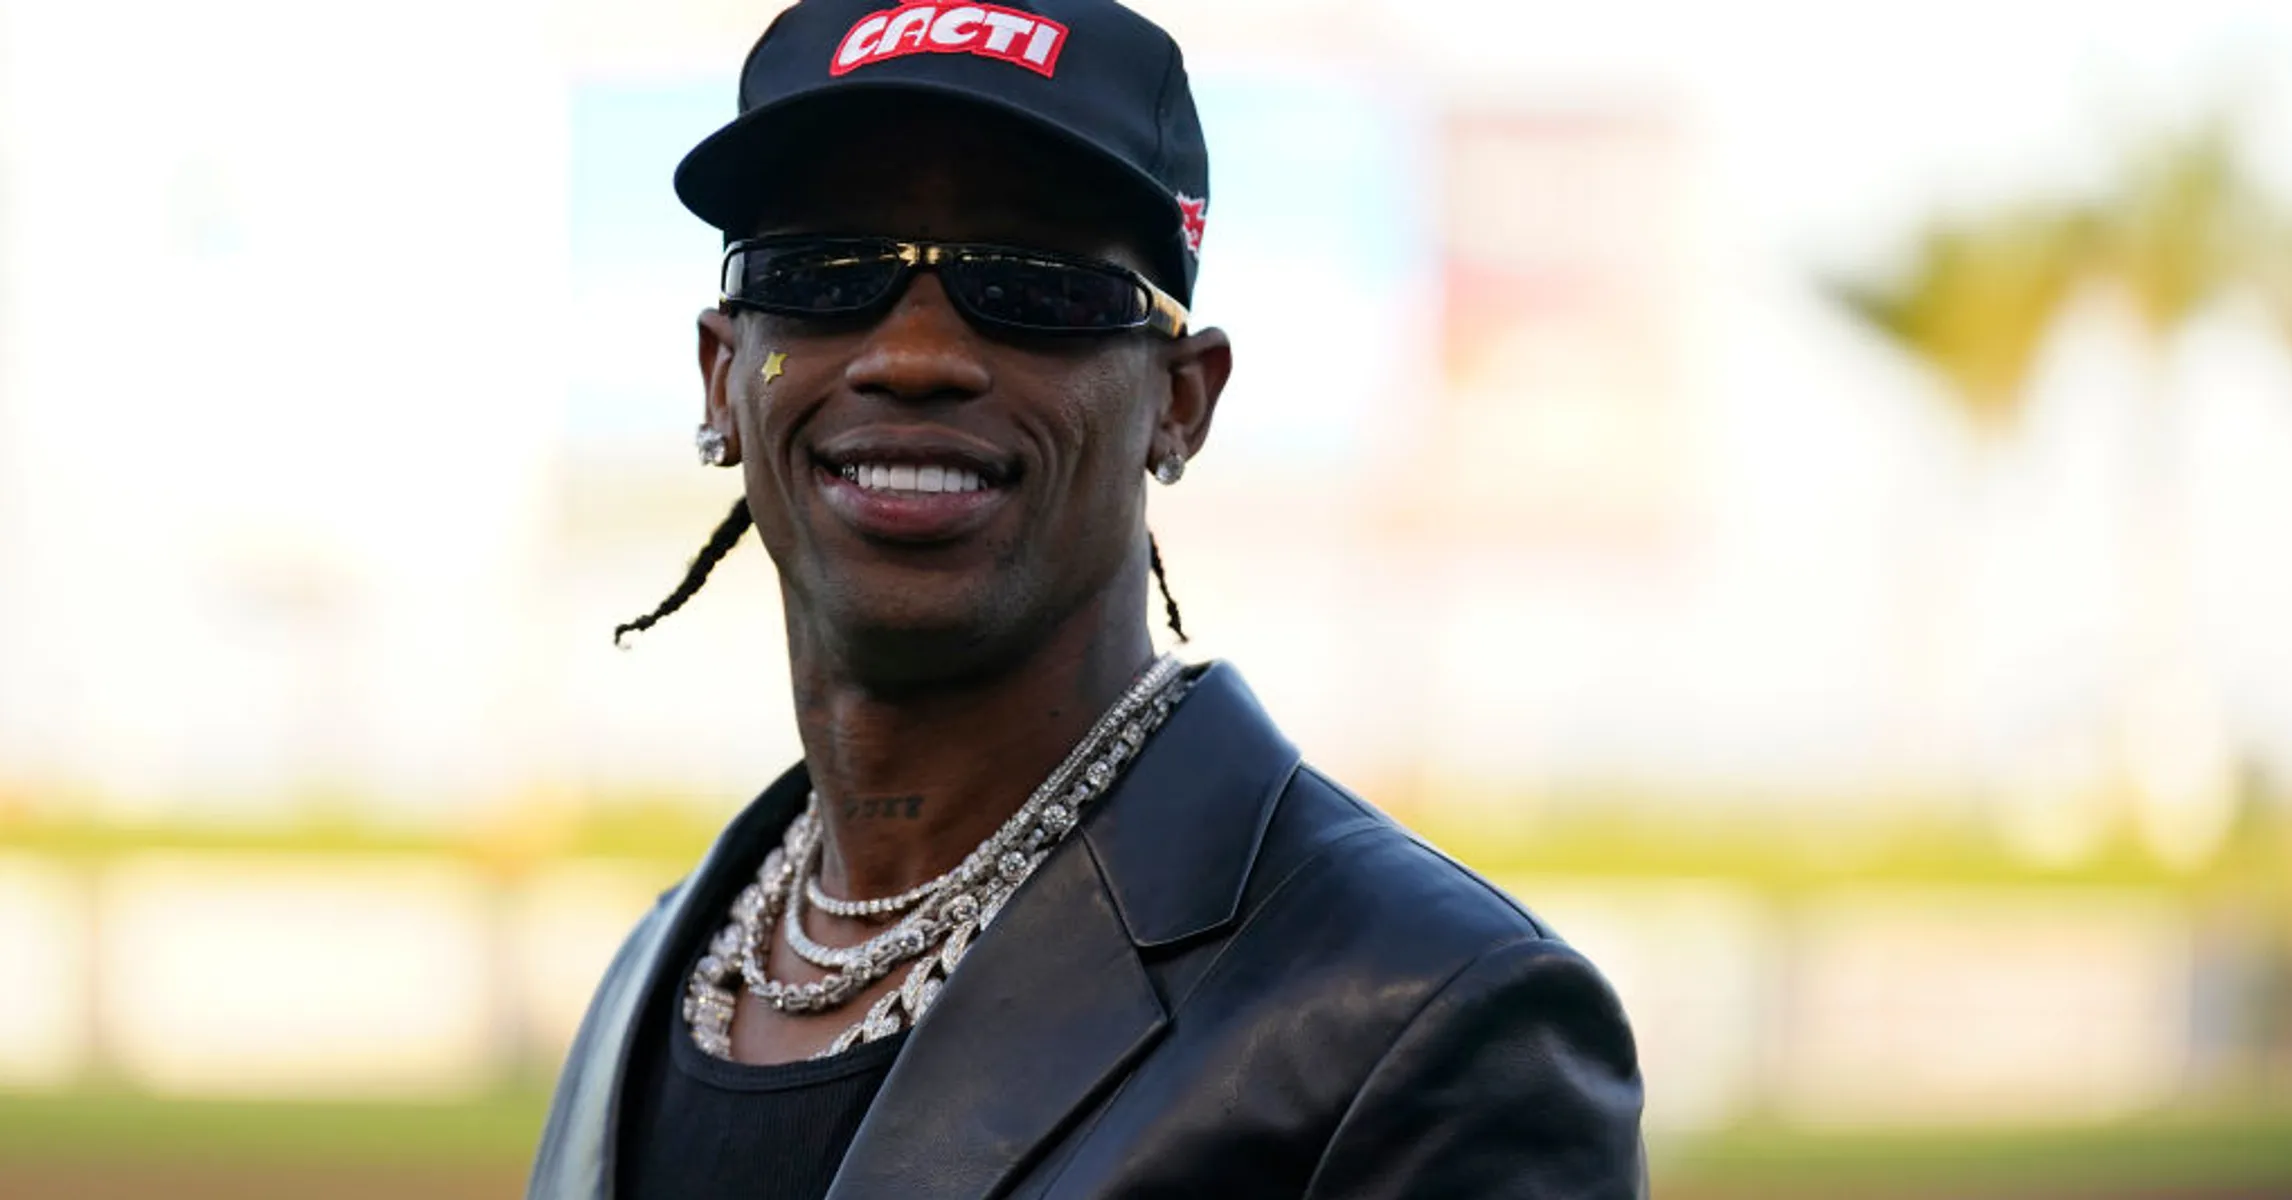 Travis Scott Launches "First-Of-Its-Kind" NCAA Collection At LSU Campus